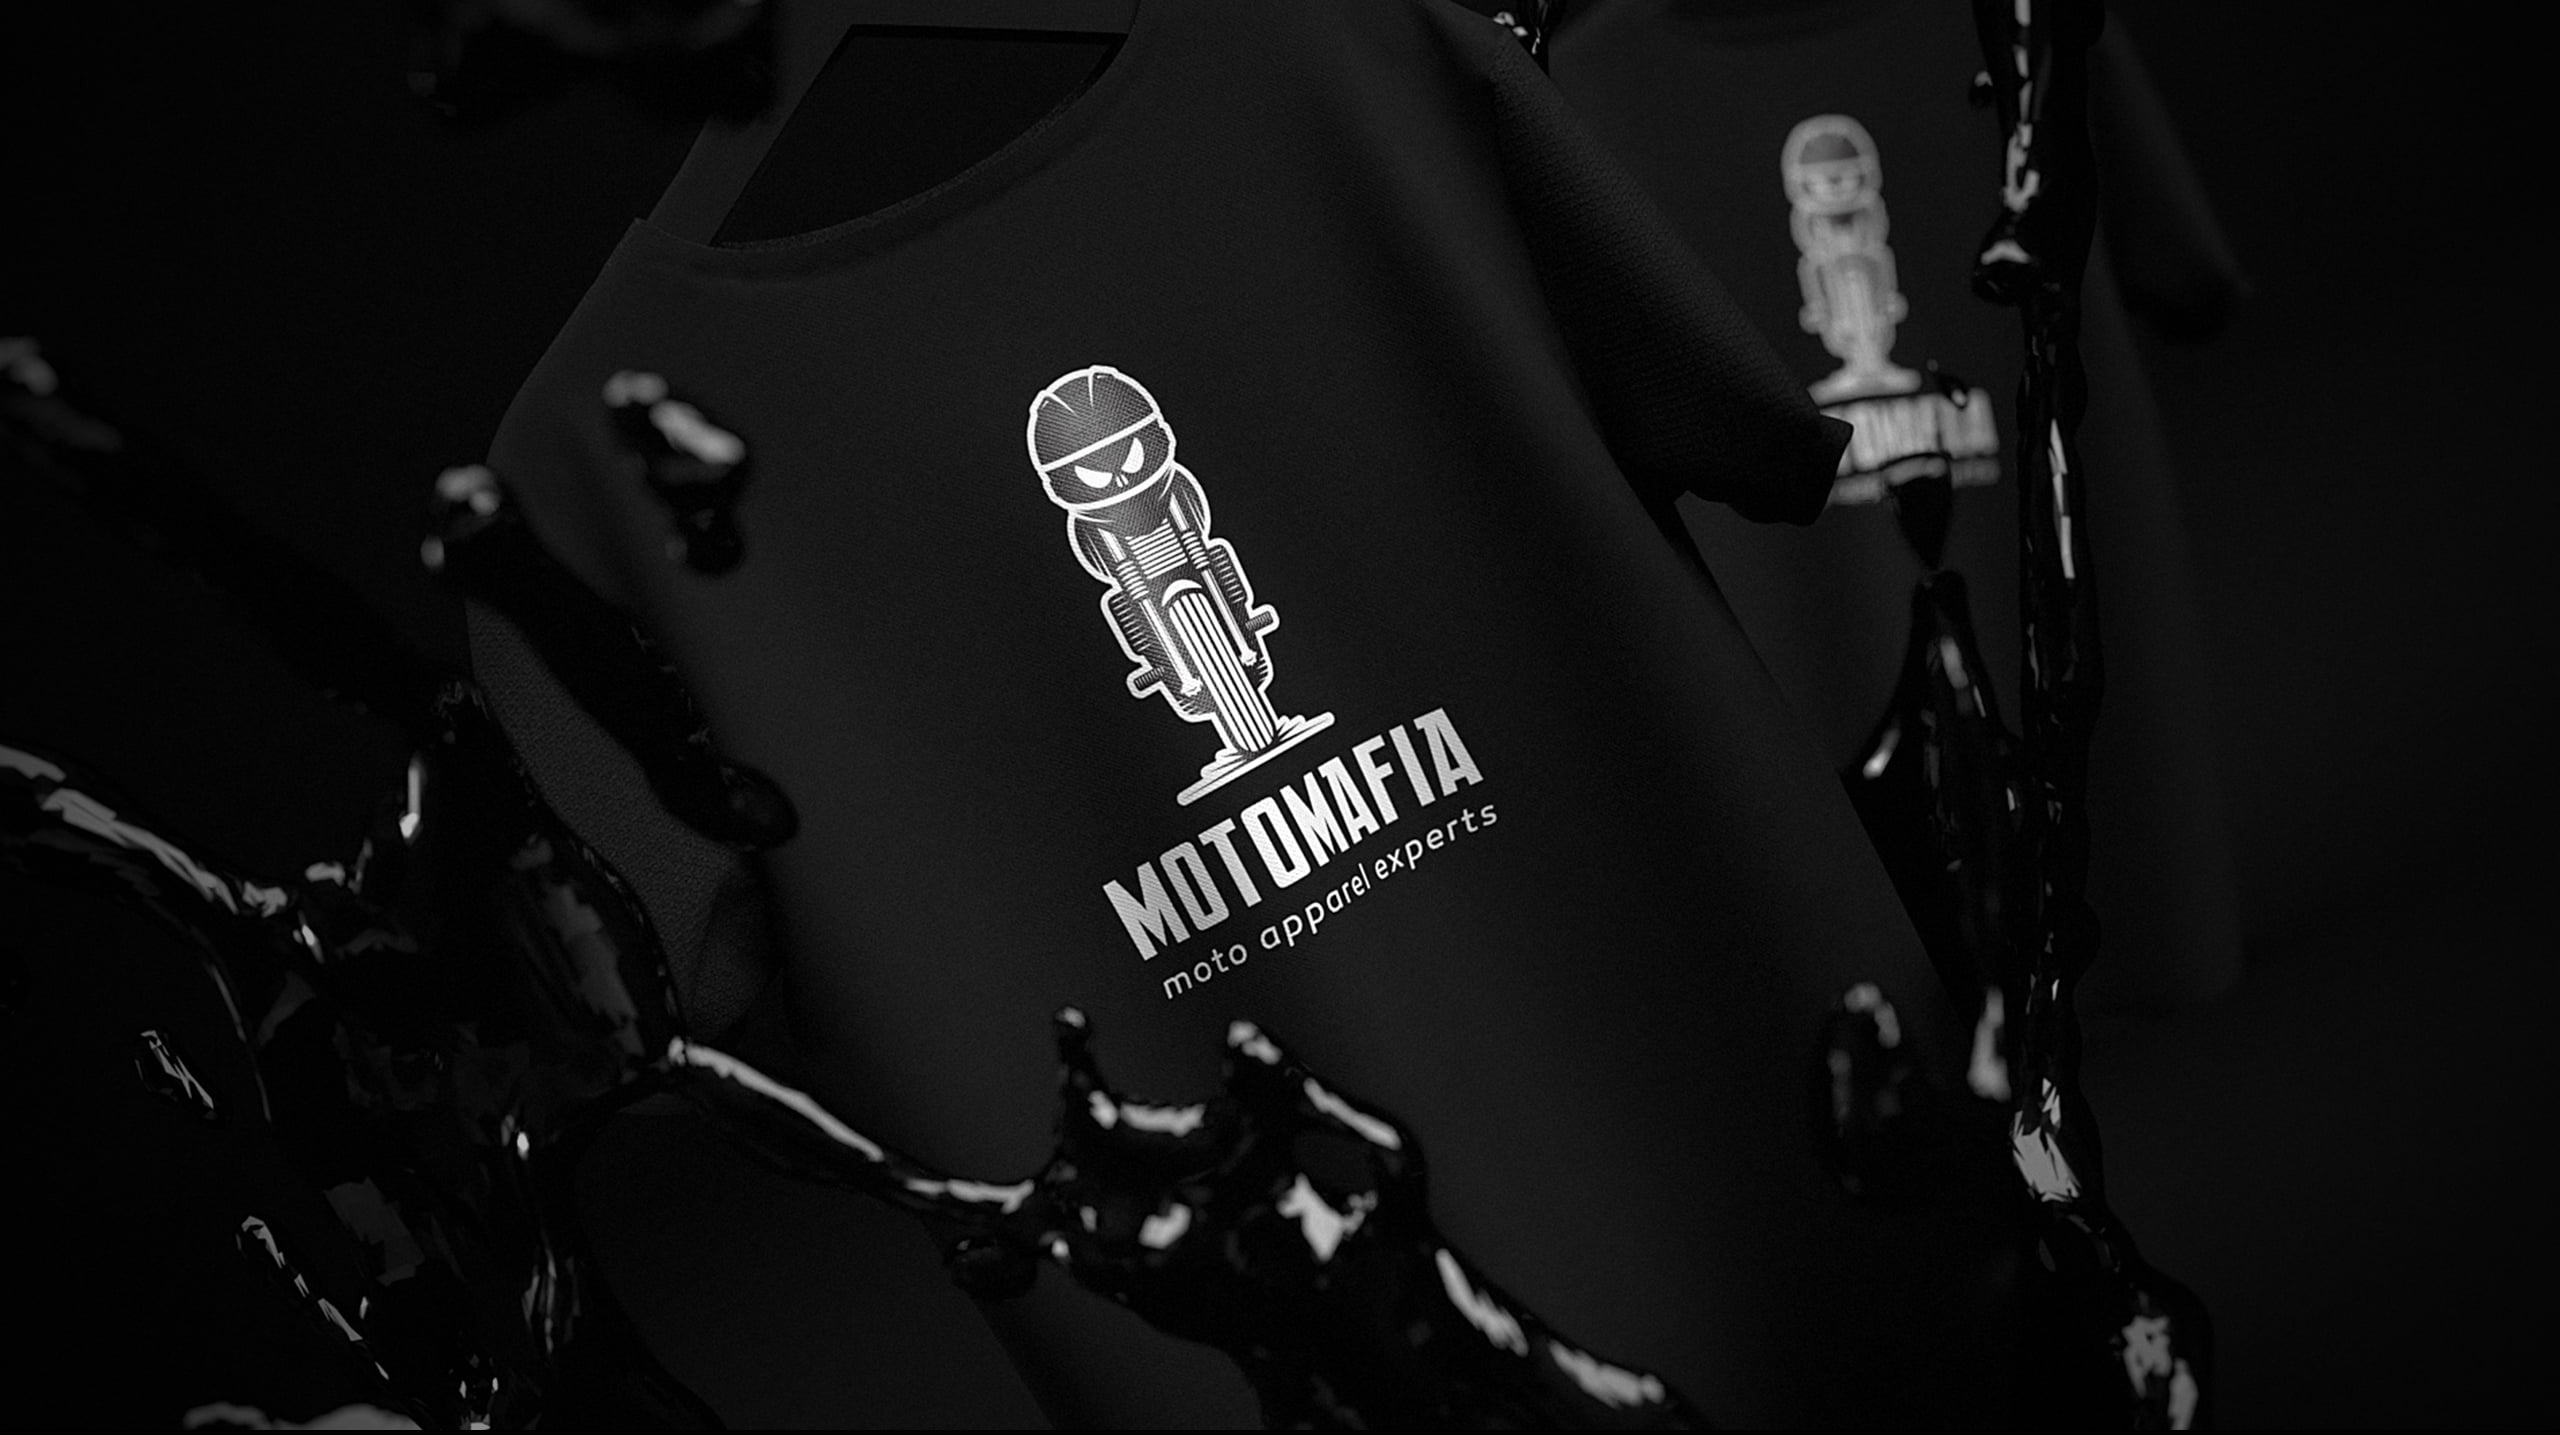 motorcycle apparel brand Motomafia logo redesign symbolizing a person on the motorcycle.